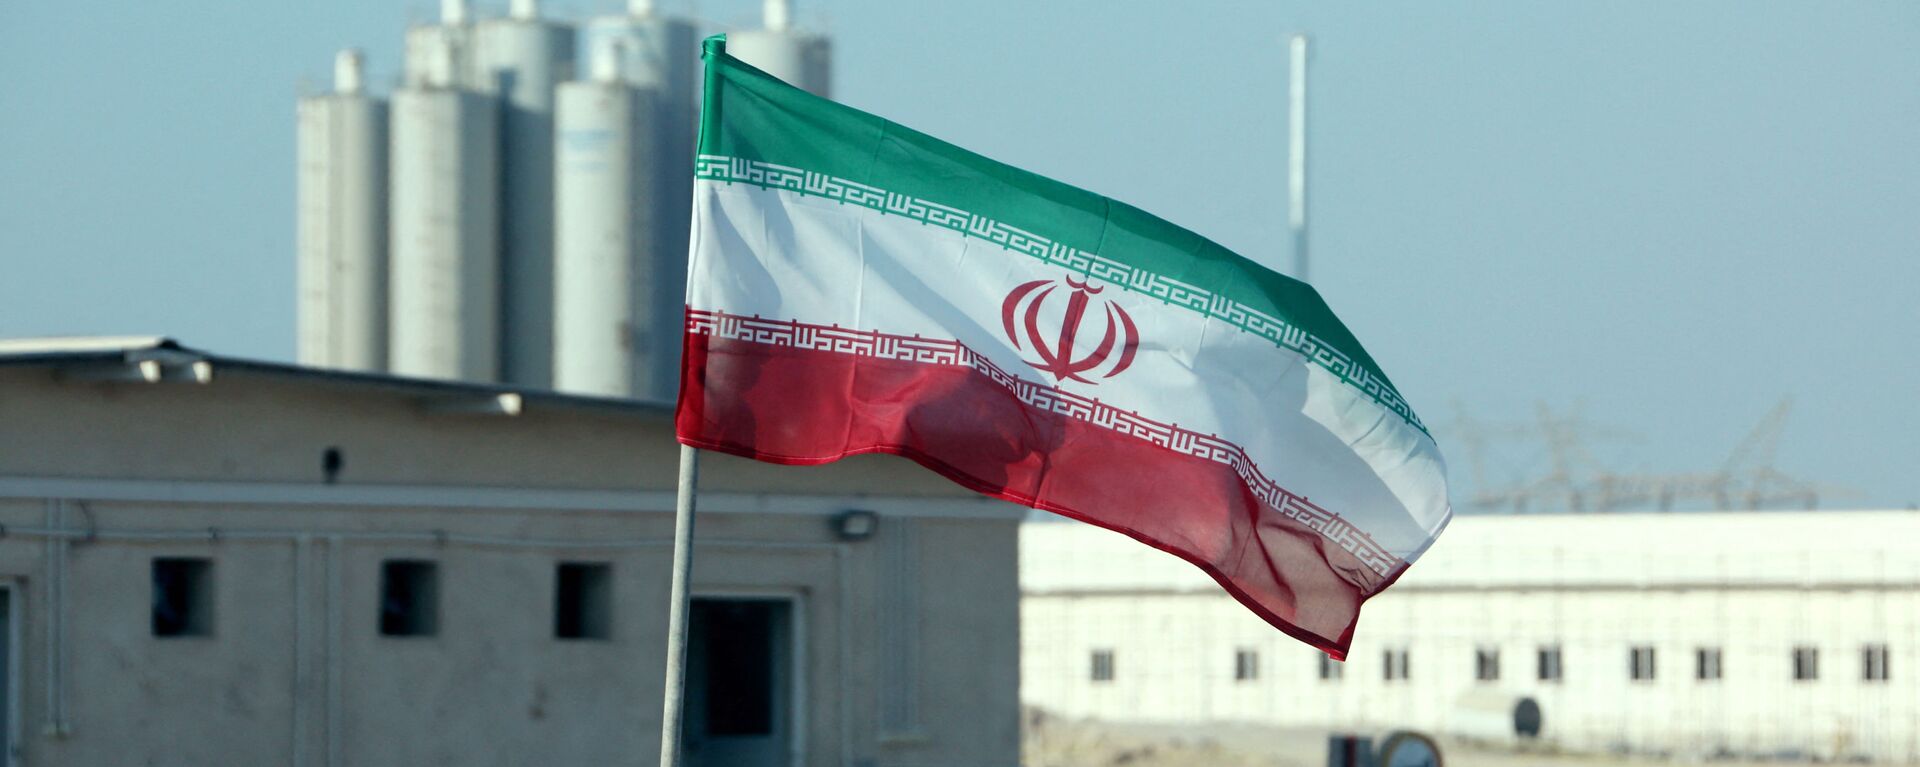 A picture taken on November 10, 2019, shows an Iranian flag in Iran's Bushehr nuclear power plant, during an official ceremony to kick-start works on a second reactor at the facility - Sputnik International, 1920, 04.12.2022